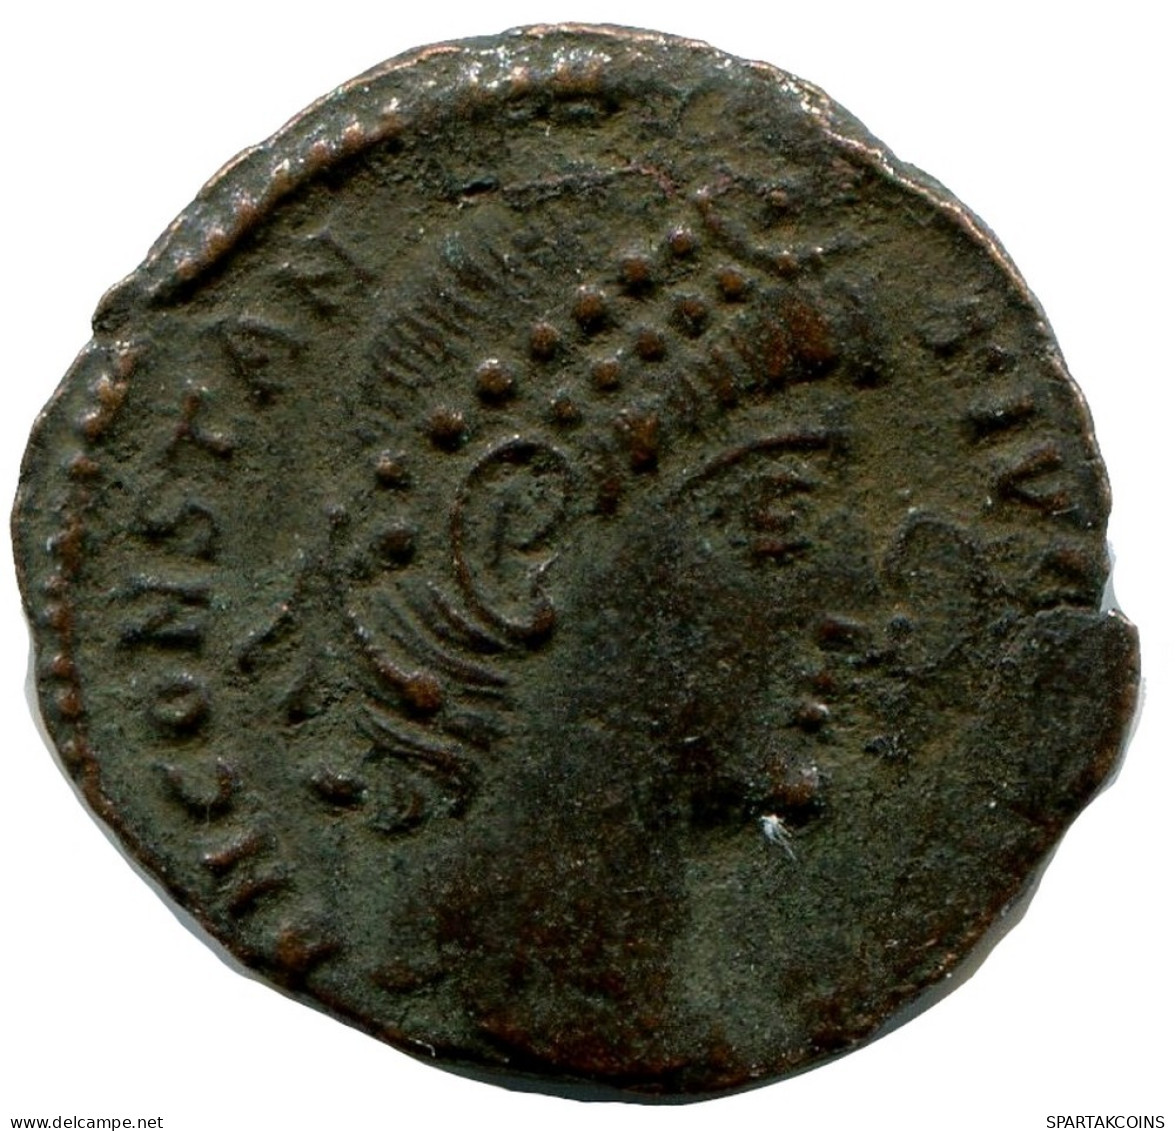 CONSTANTIUS II MINT UNCERTAIN FOUND IN IHNASYAH HOARD EGYPT #ANC10062.14.E.A - The Christian Empire (307 AD To 363 AD)